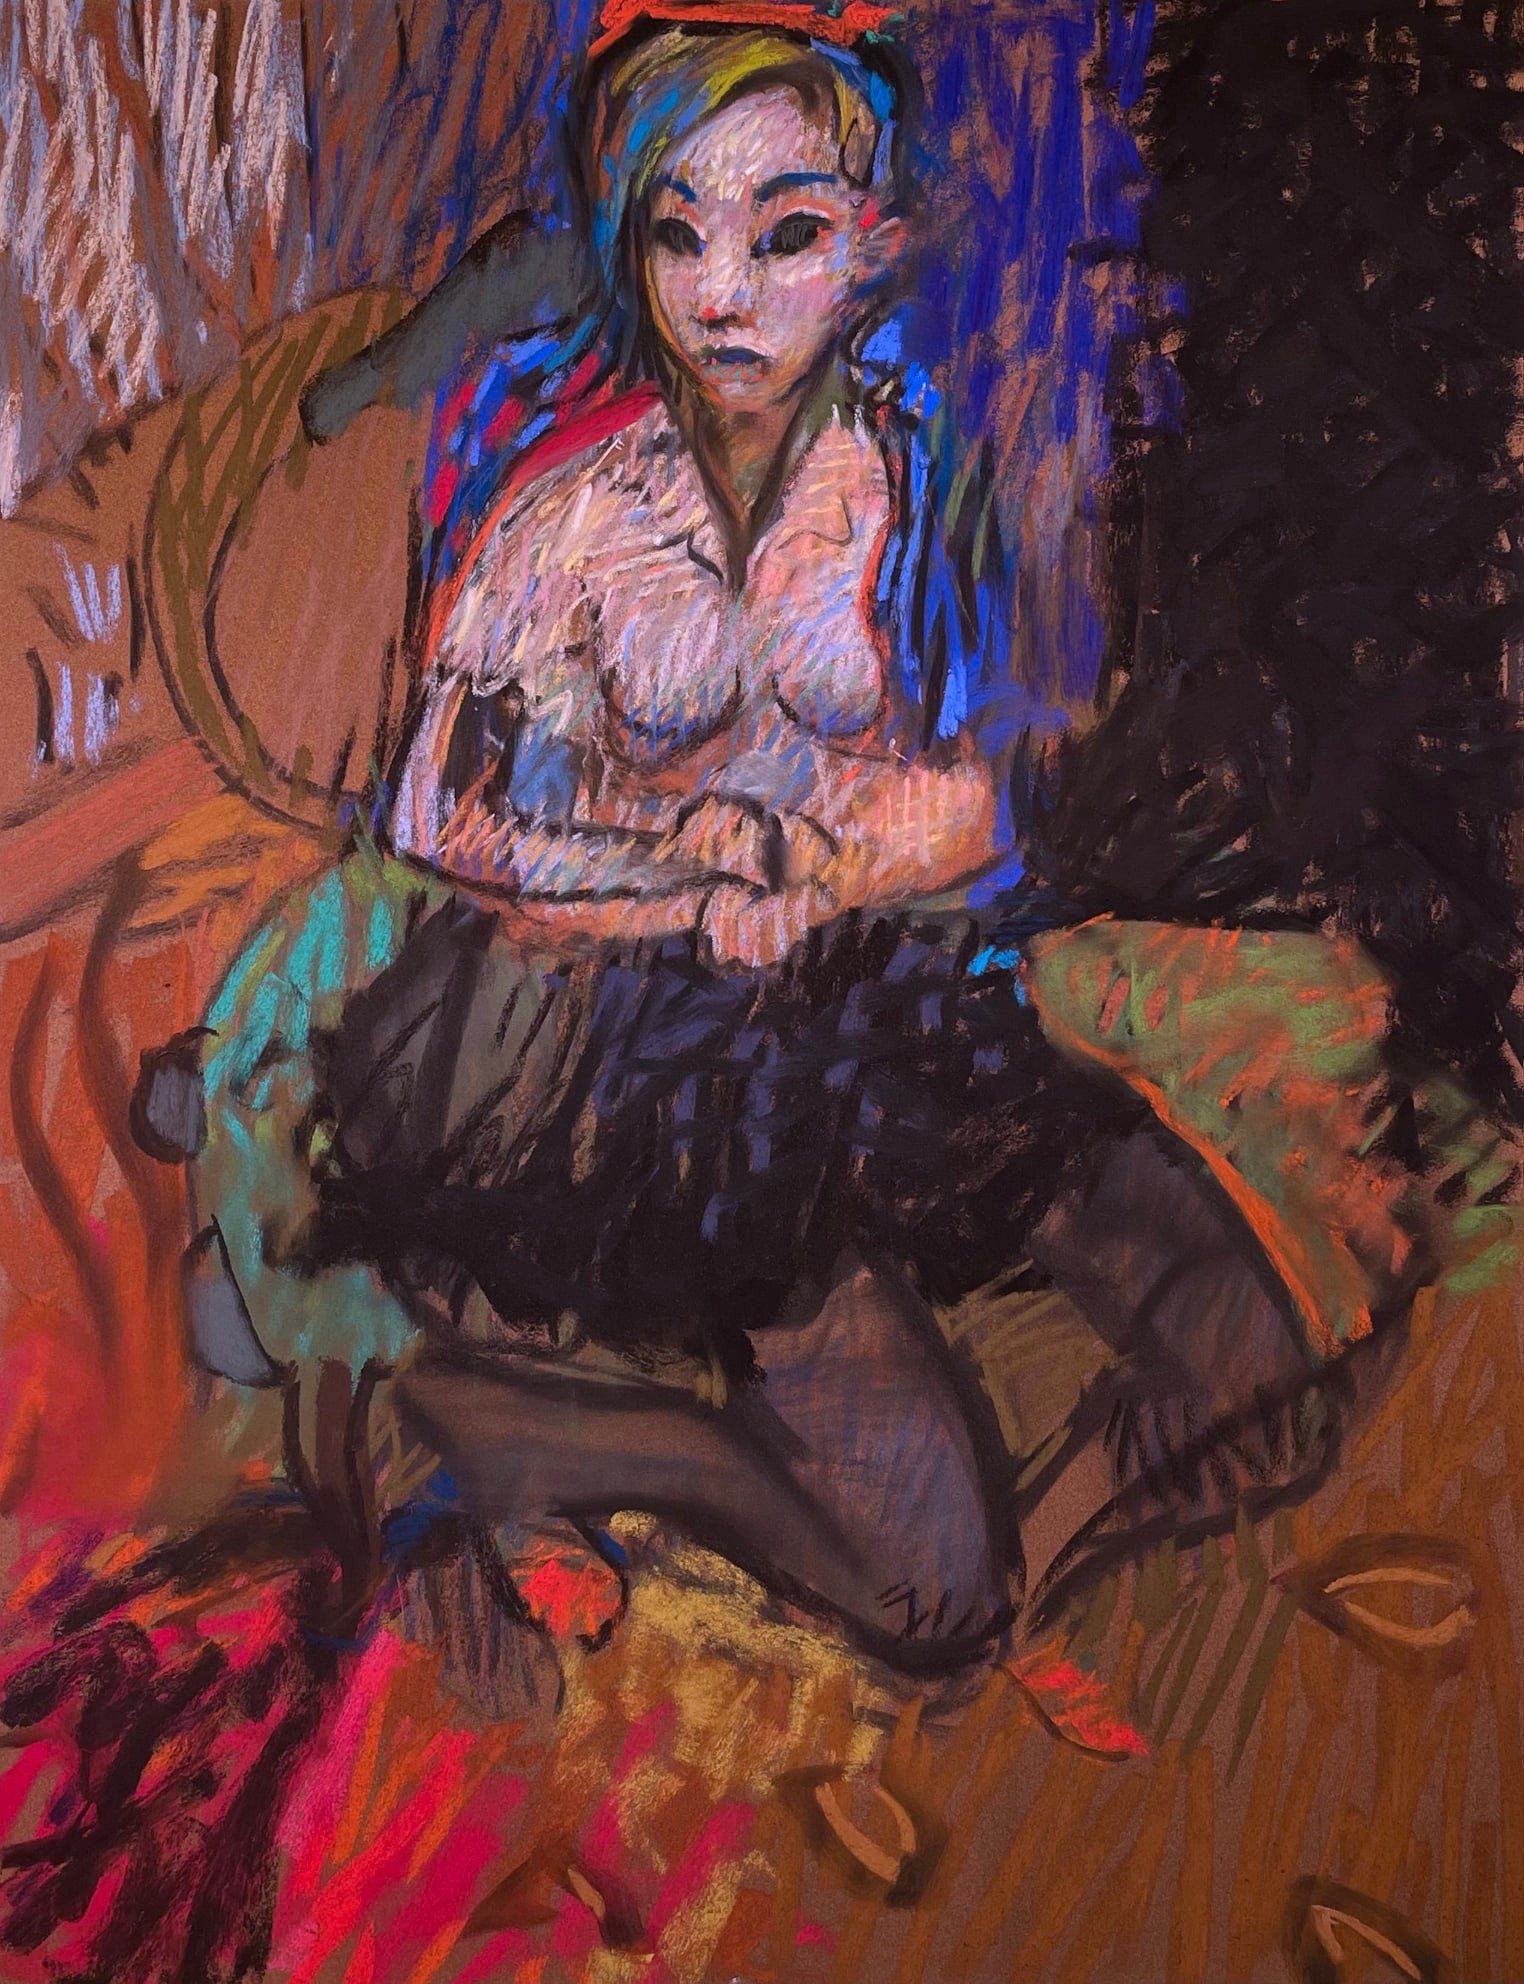 Influence of Matisse's "Woman With a Hat": Casey Klahn, "Model Seated in the Brown Chair," 2022, pastel on paper